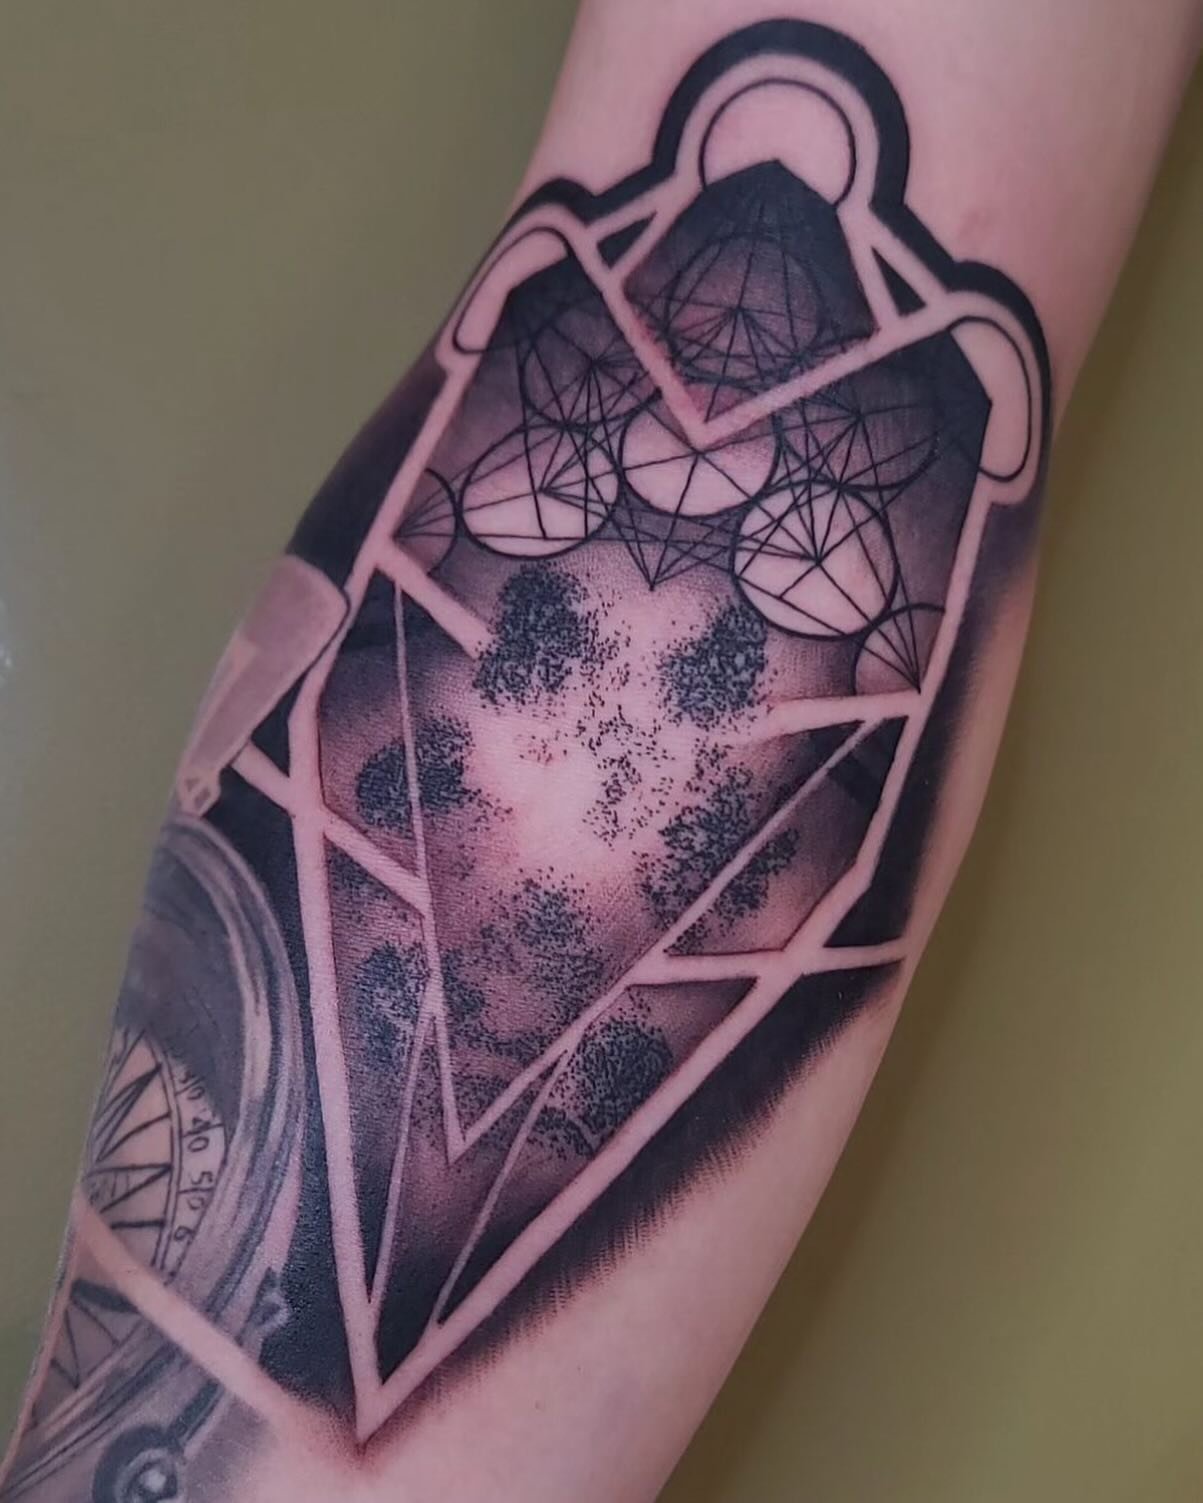 Jenny &lsquo;s version of a still shor of this geometric forearm piece.
She&rsquo;s Finding interesting way&rsquo;s of incorporating his dog&rsquo;s paw print and still keeping the theme of interesting geometric shapes.
This is the third piece on his